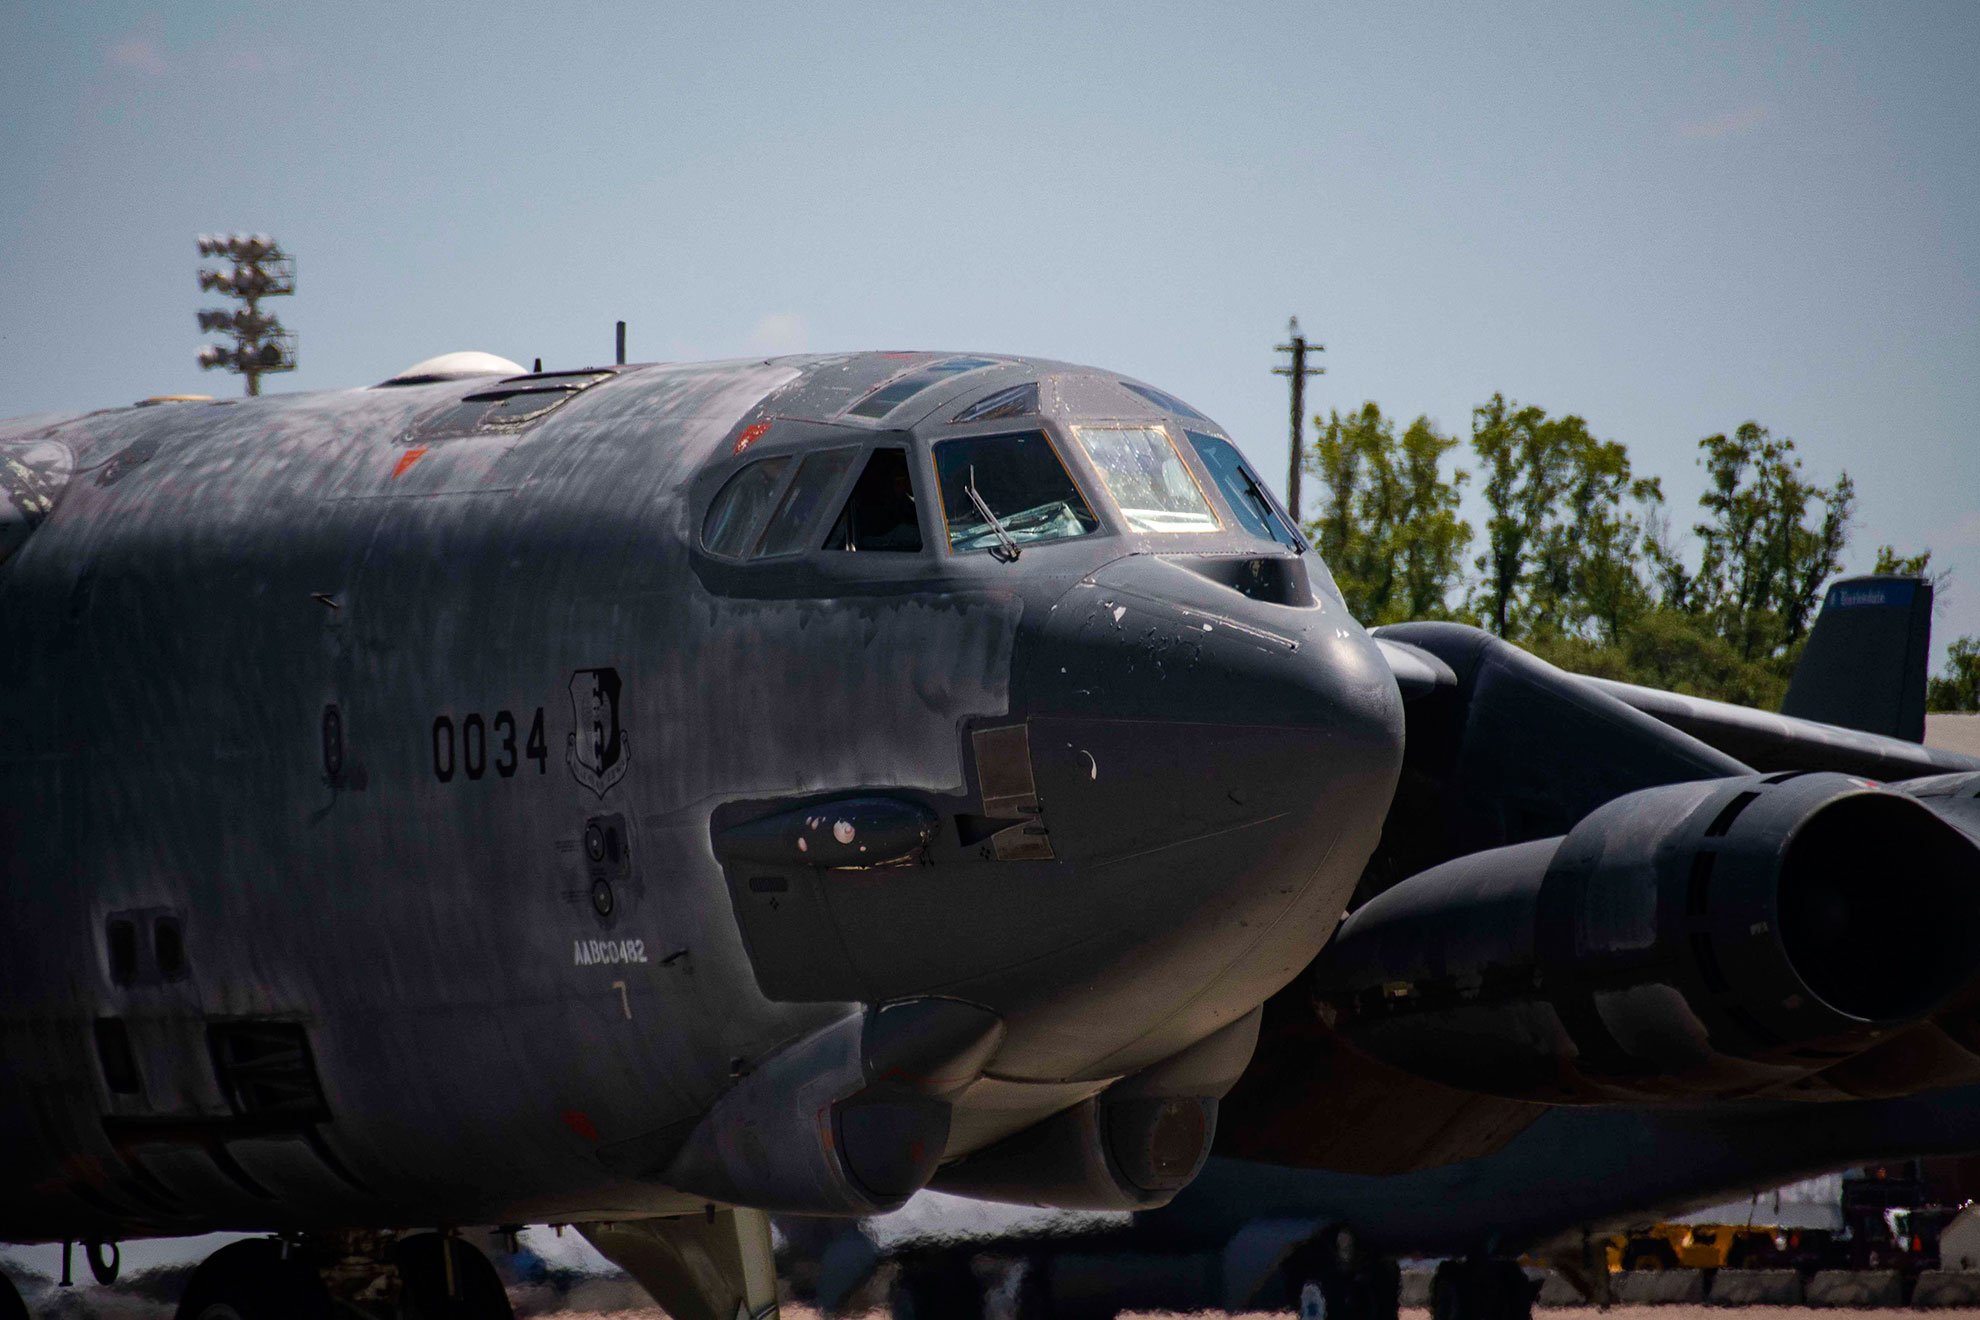 A B-52 Stratofortress, nicknamed "Wise Guy," taxis into Barksdale Air Force Base, La., May 14, 2019. The jet had been sitting at the 309th Aerospace Maintenance and Regeneration Group at Davis-Monthan AFB, Ariz. since 2008. It is being returned to service to replace a B-52 lost during takeoff in 2016 -- U.S. Air Force photo by Master Sgt. Ted Daigle. -